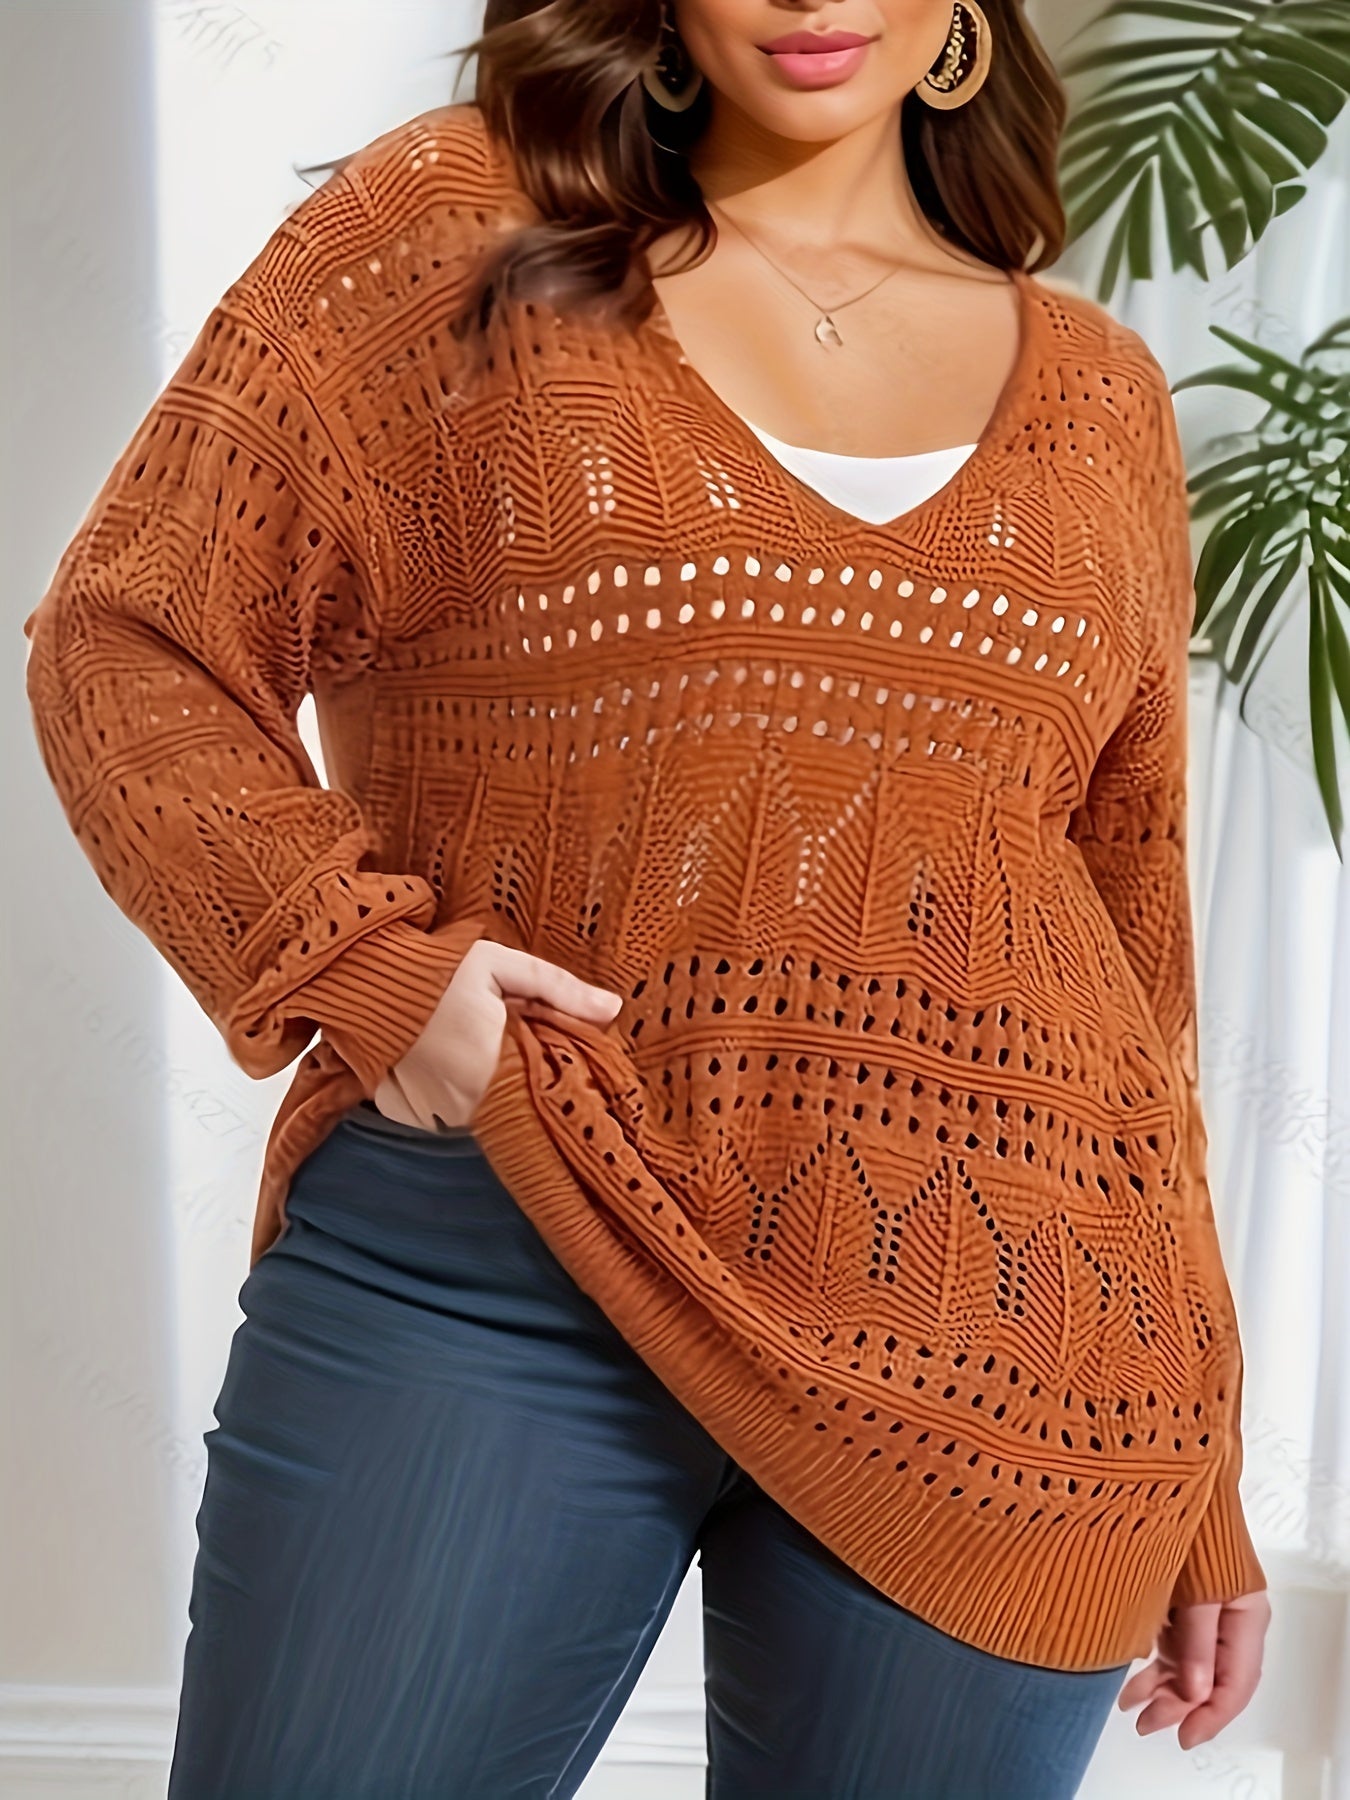 Plus Size Casual Knit Top, Women's Plus Solid Hollow Out Long Sleeve V Neck Sheer Pullover Sweater